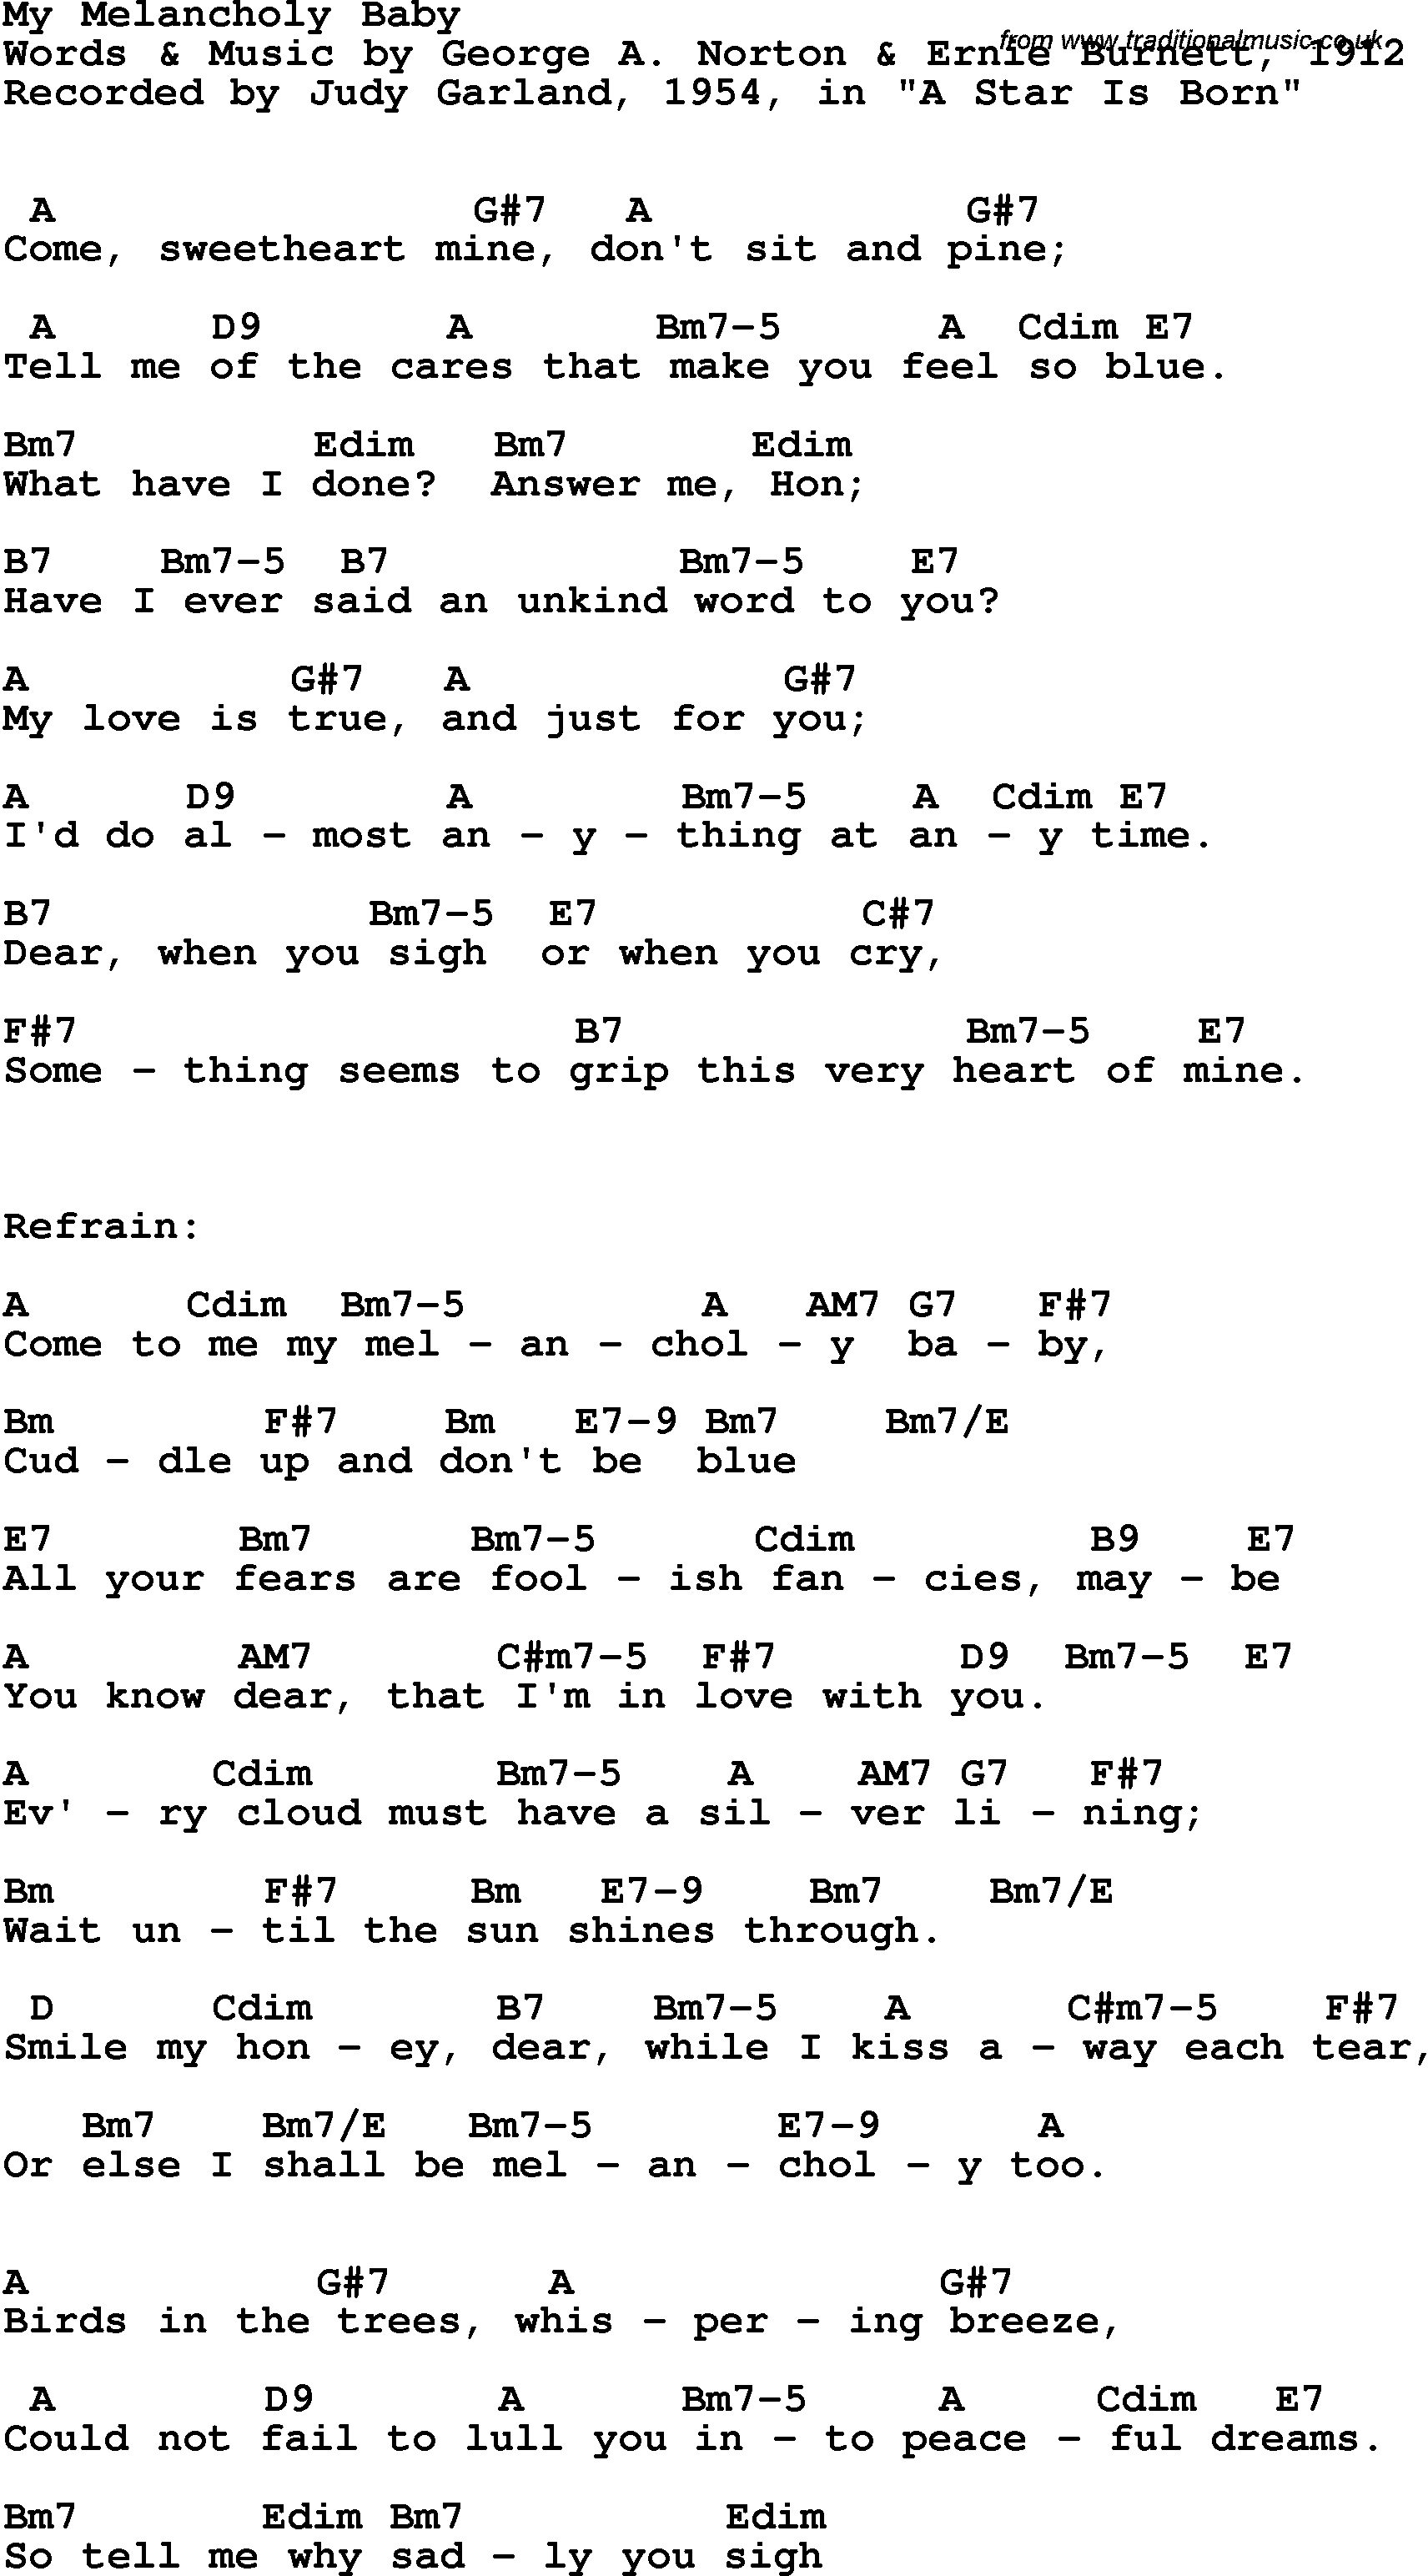 Song Lyrics with guitar chords for My Melancholy Baby - Judy Garland, 1954